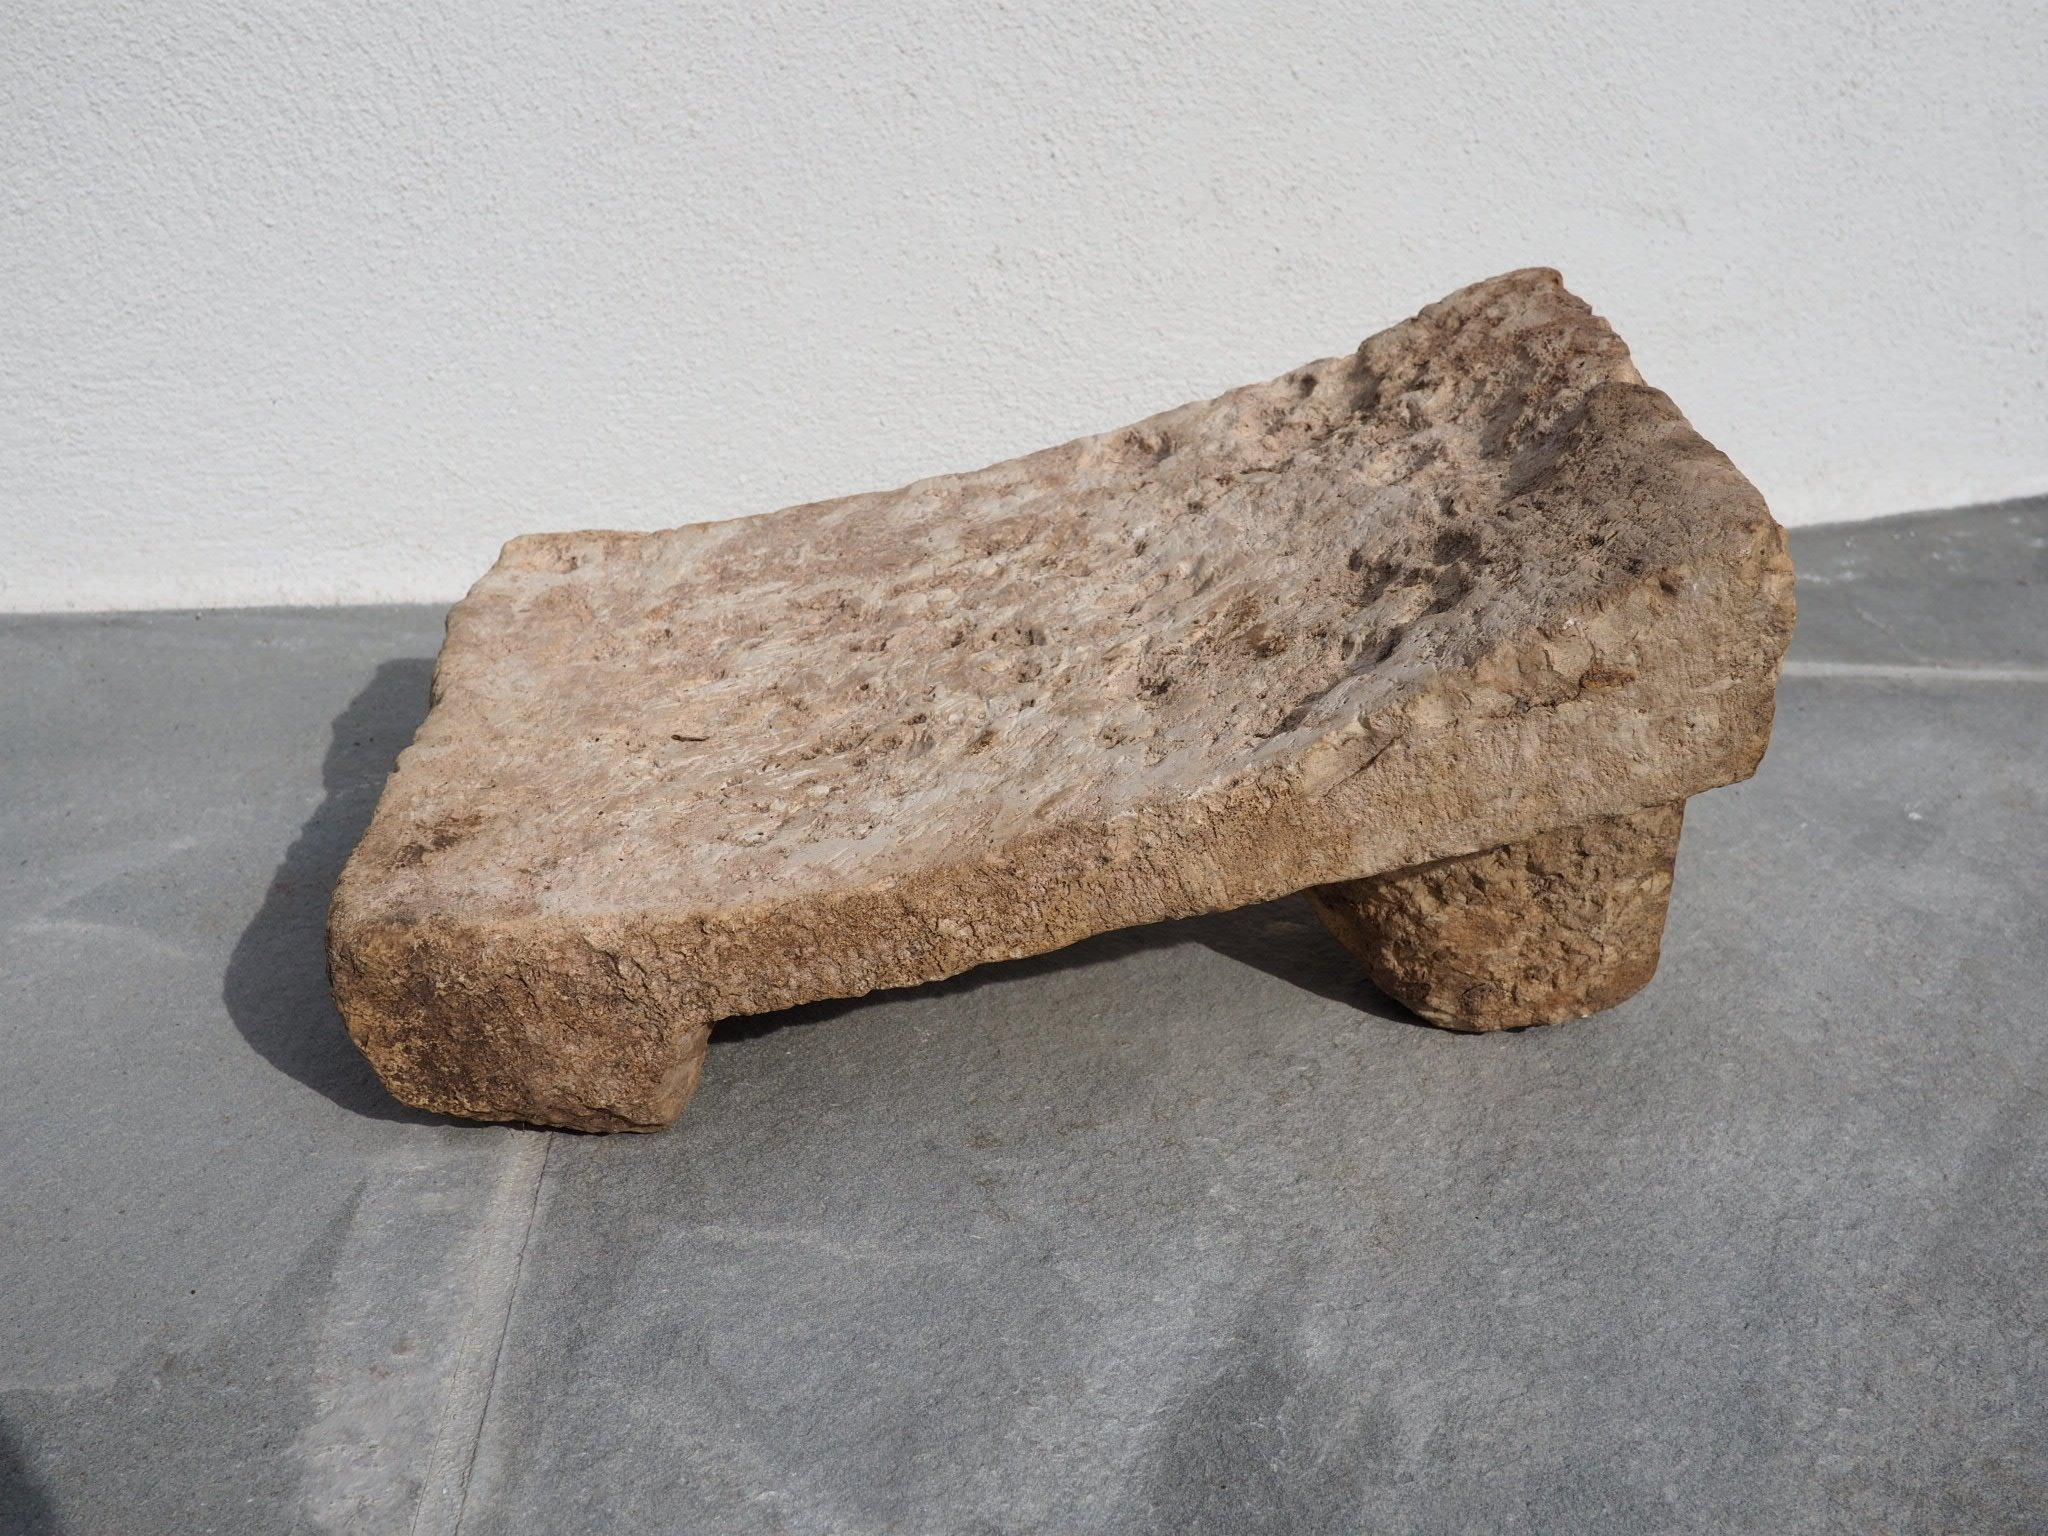 19th century hand carved metate de Piedra from Tulum. Beautifully aged & patinated.

*This item cannot be returned.